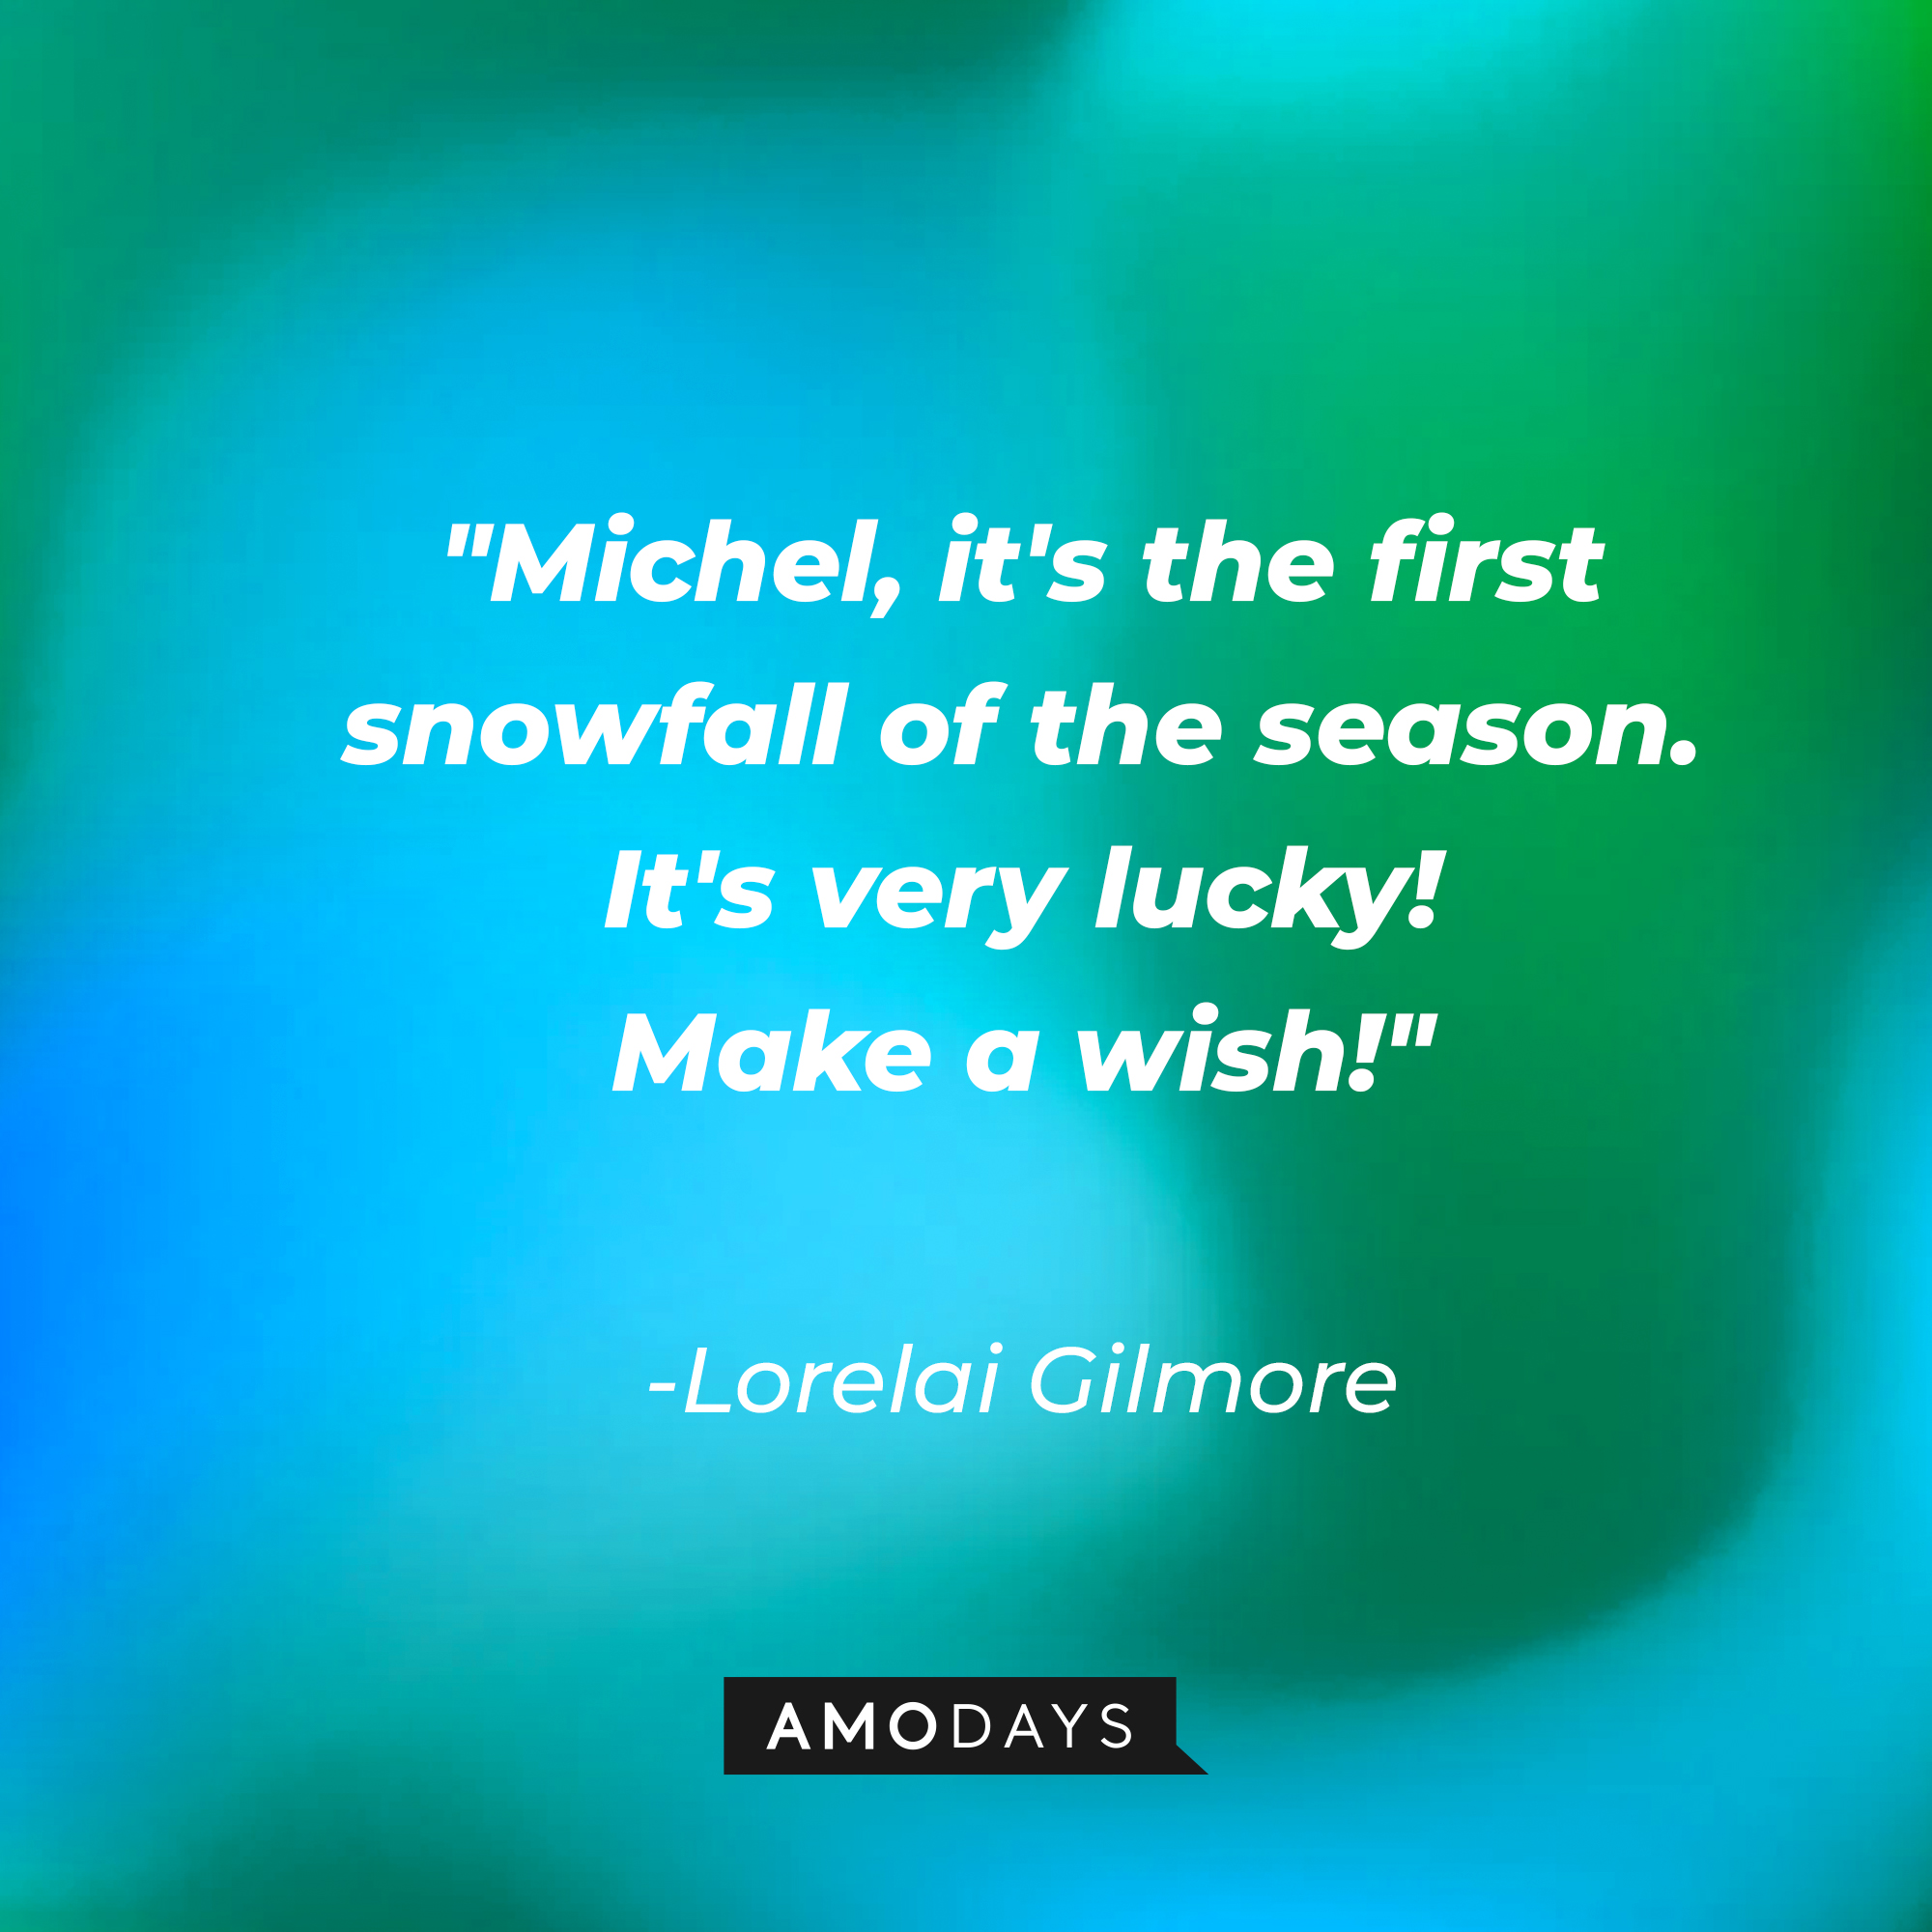 Lorelai Gilmore's quote: "Michel, it's the first snowfall of the season. It's very lucky! Make a wish!" | Source: AmoDays